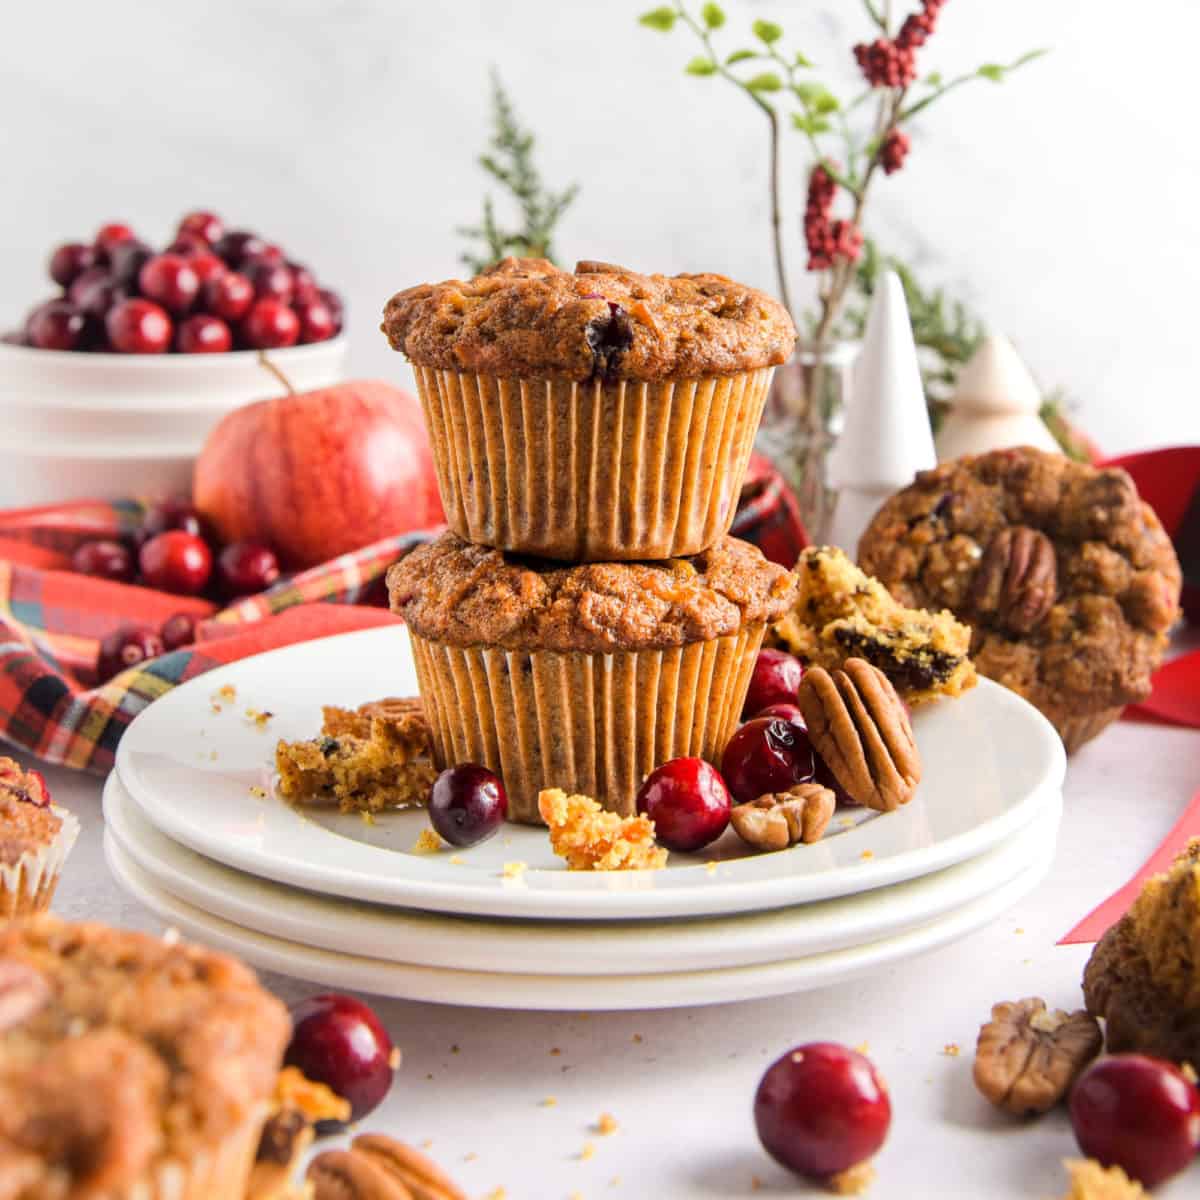 Two cranberry apple muffins on a white plate.